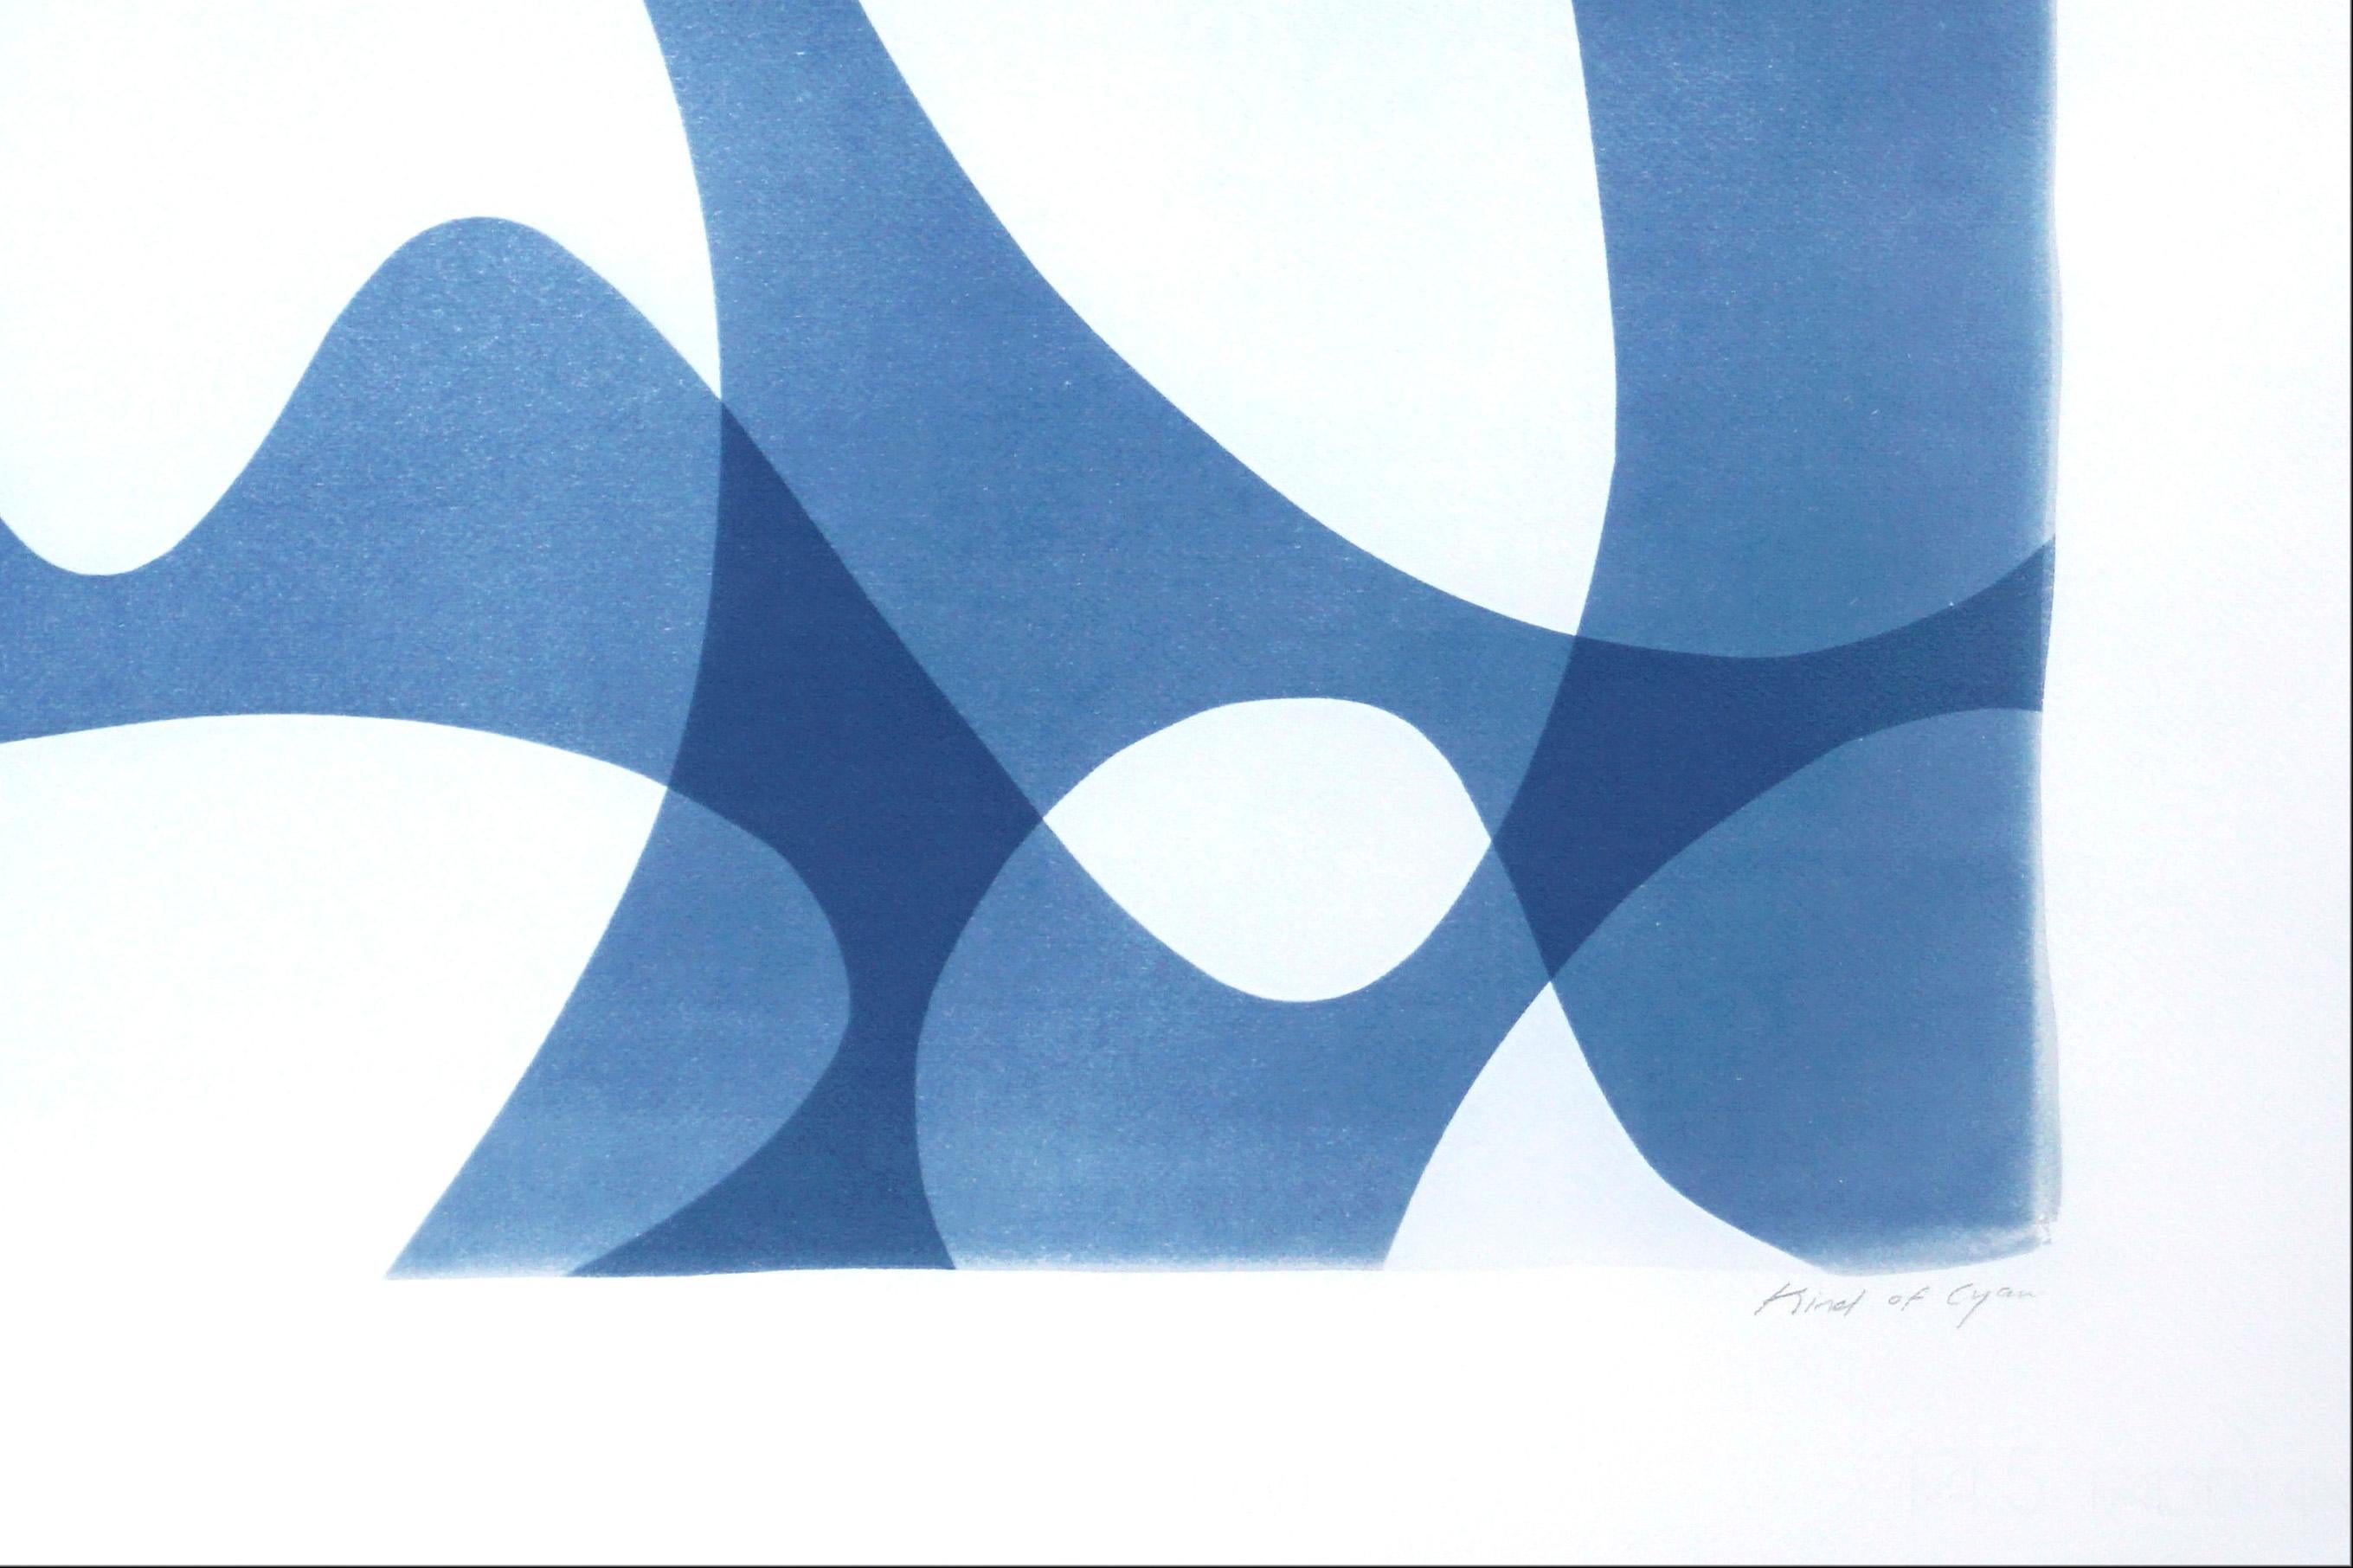 Vanguard Shapes and Shadows, Horizontal Organic Forms, White and Blue Monotype - Minimalist Print by Kind of Cyan